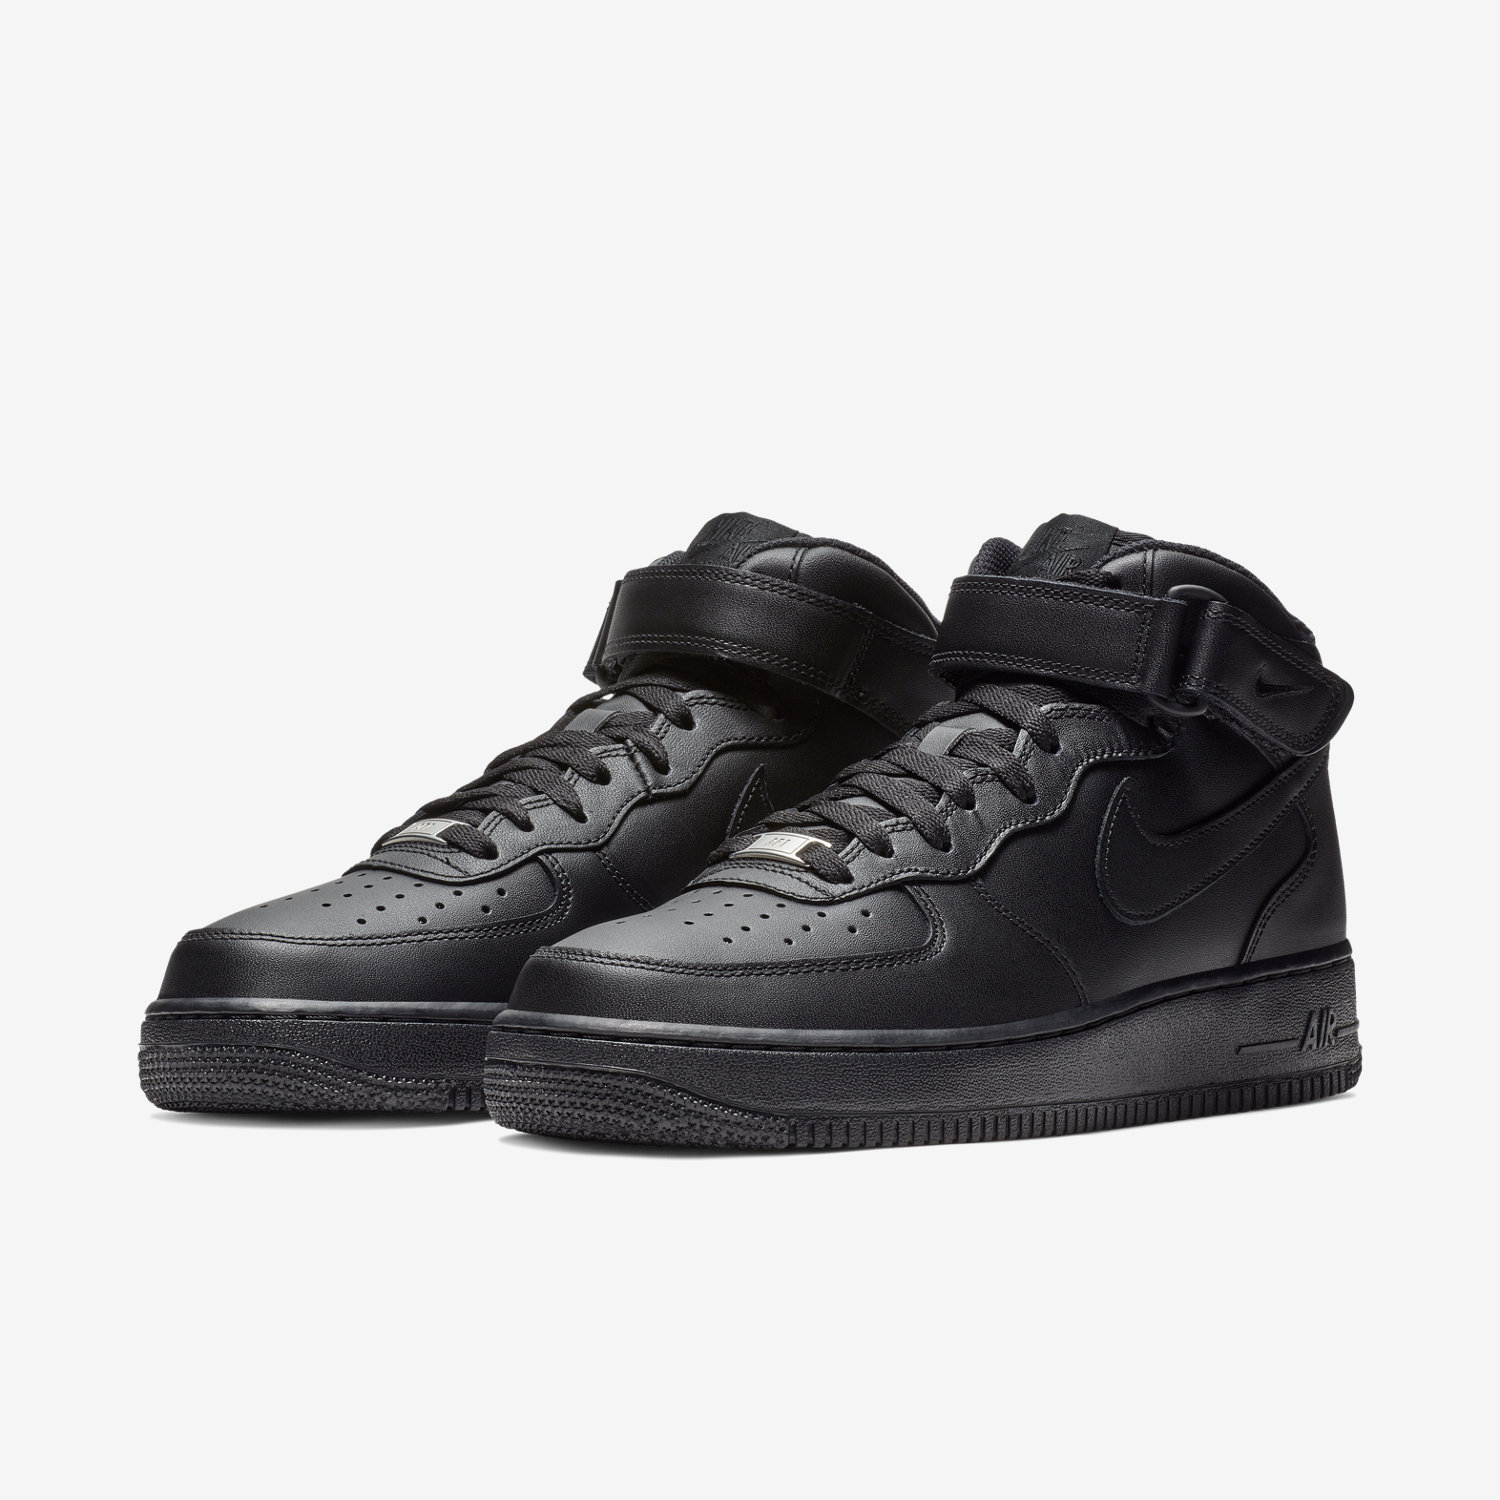 air force one nike negras